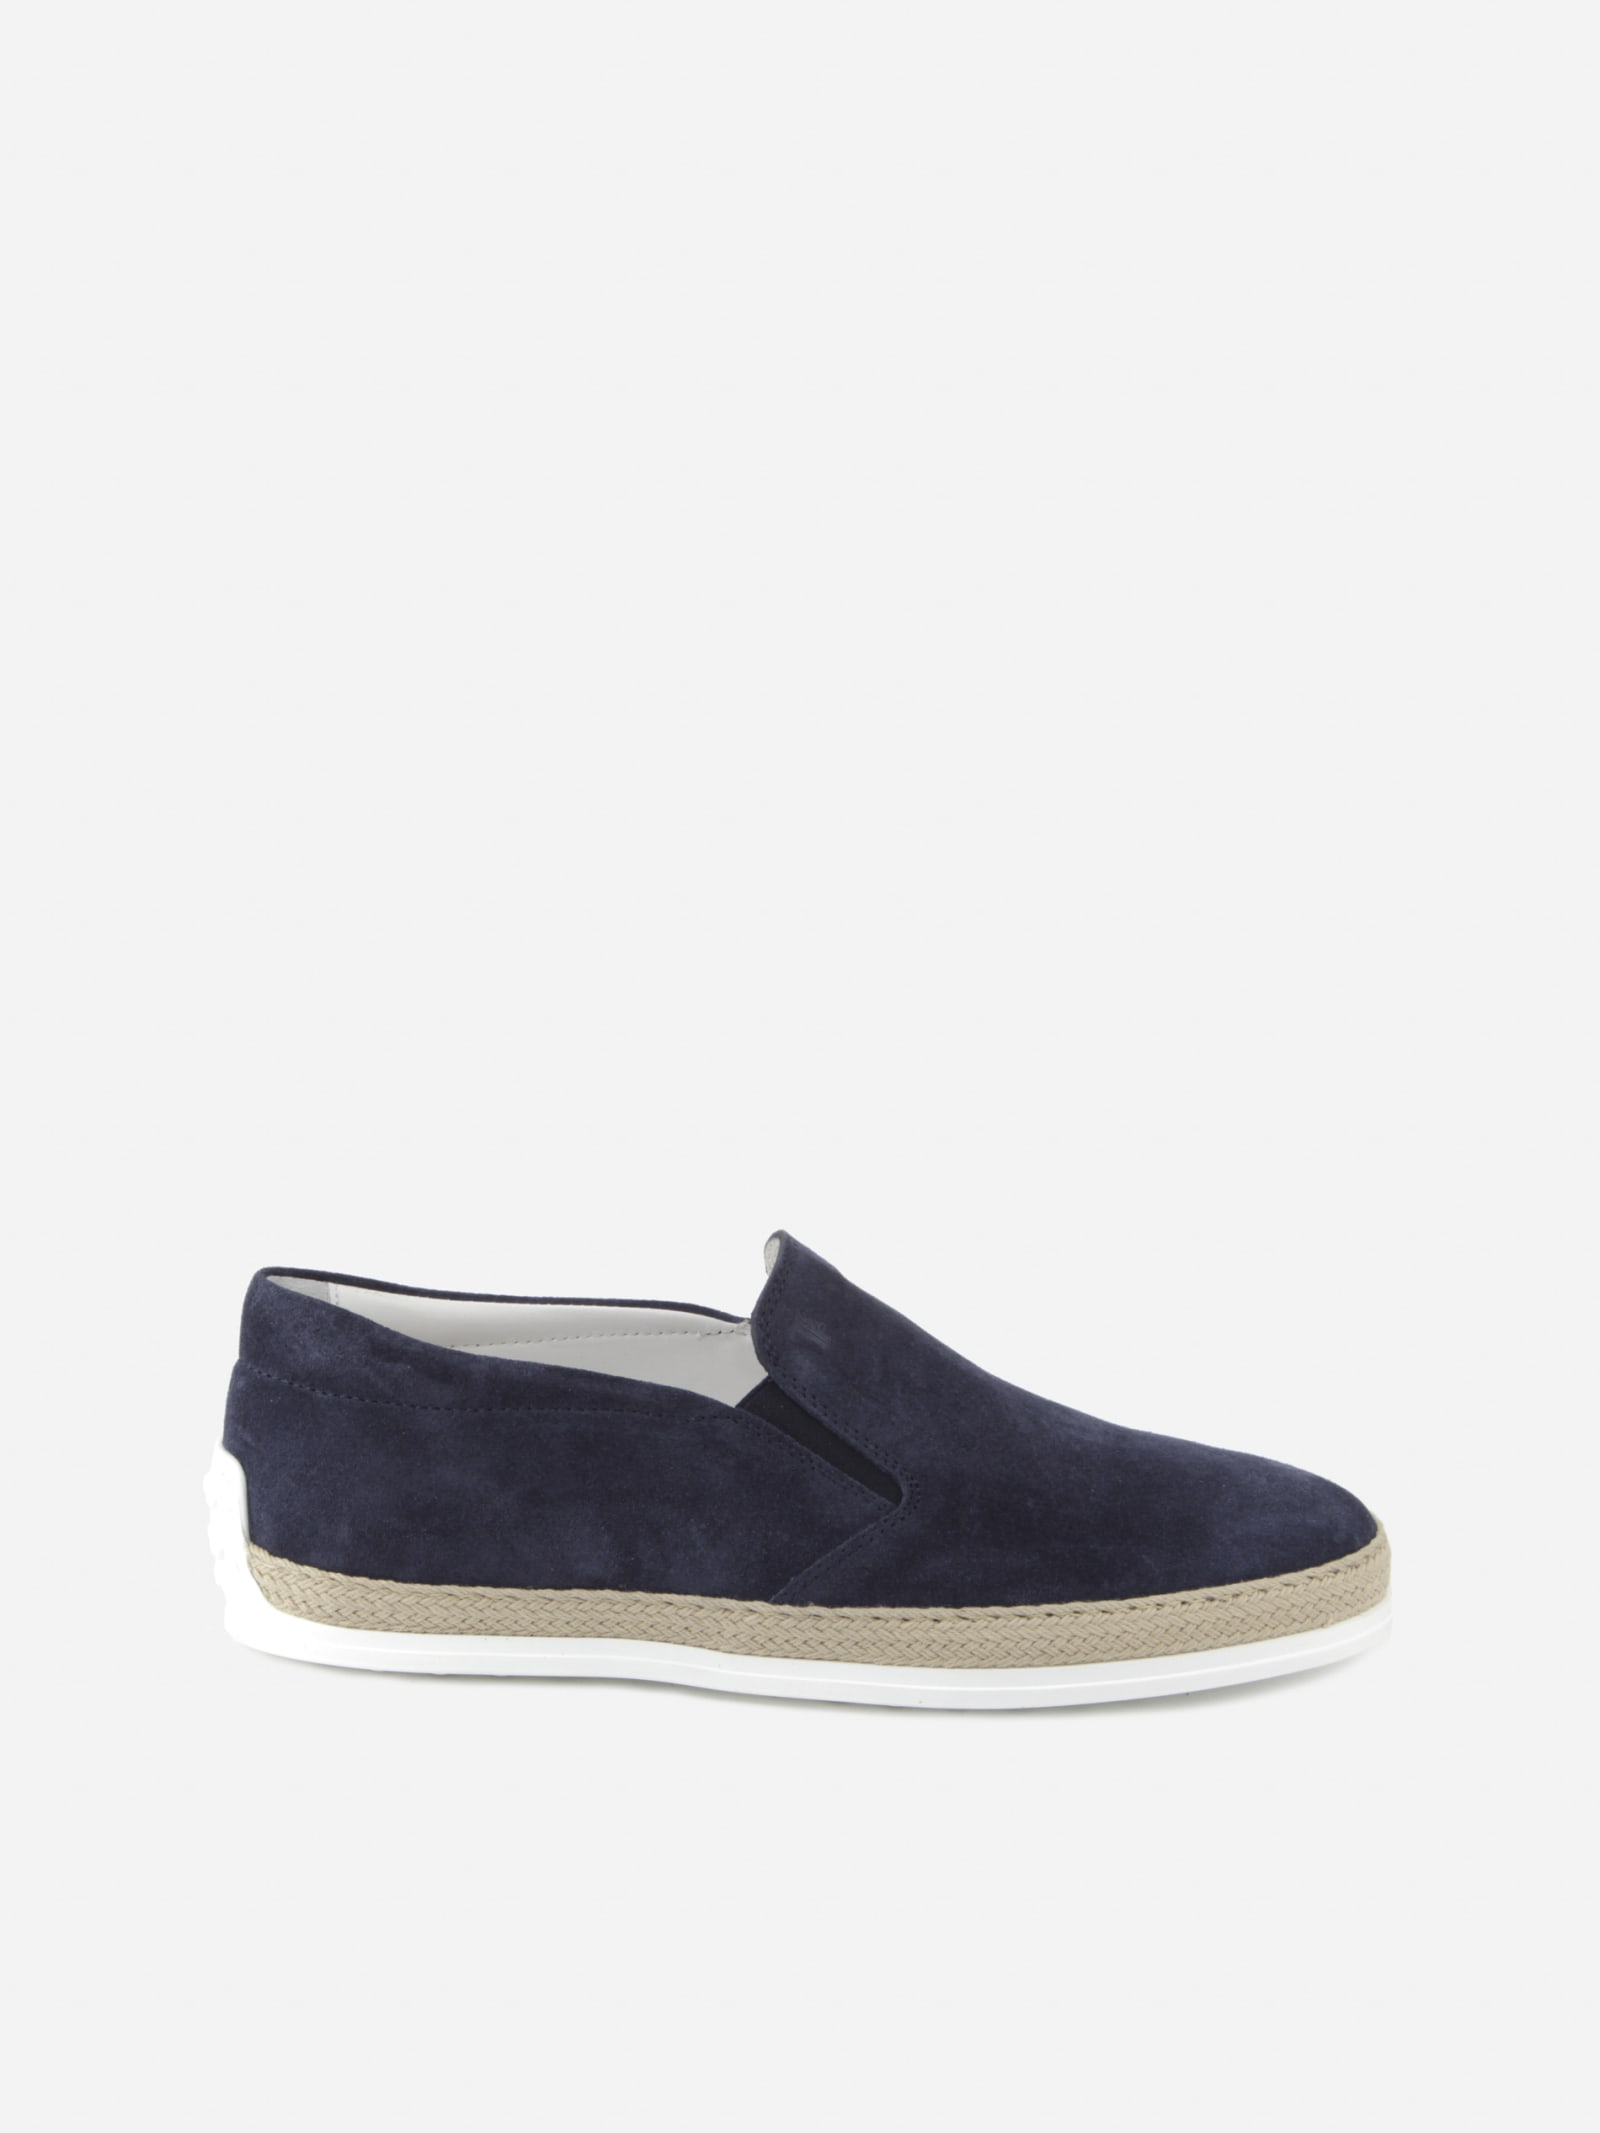 Tods Suede Slip-ons